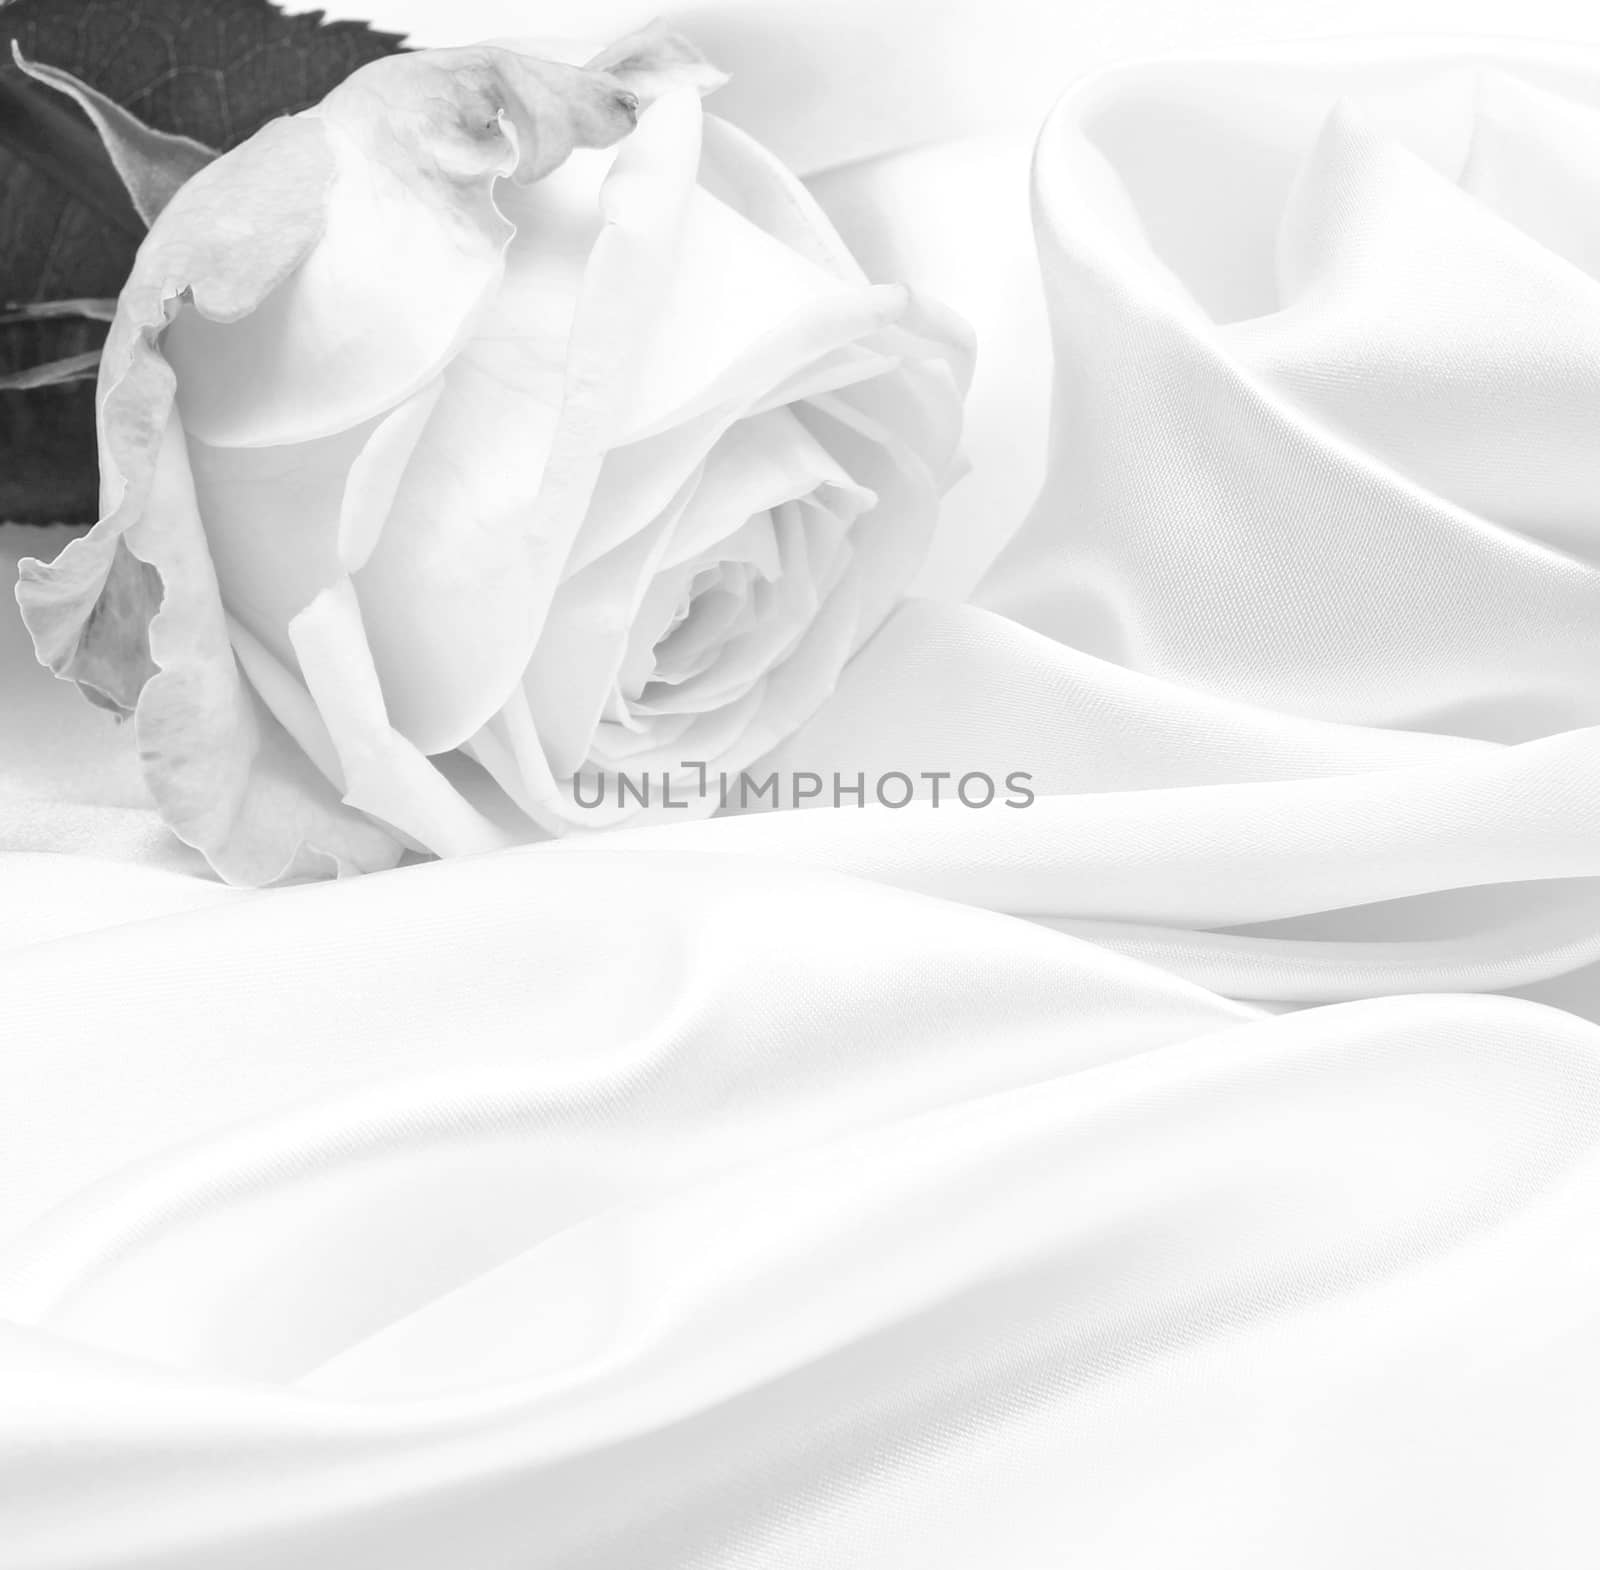  Beautiful white roses in black and white on white silk as wedding background